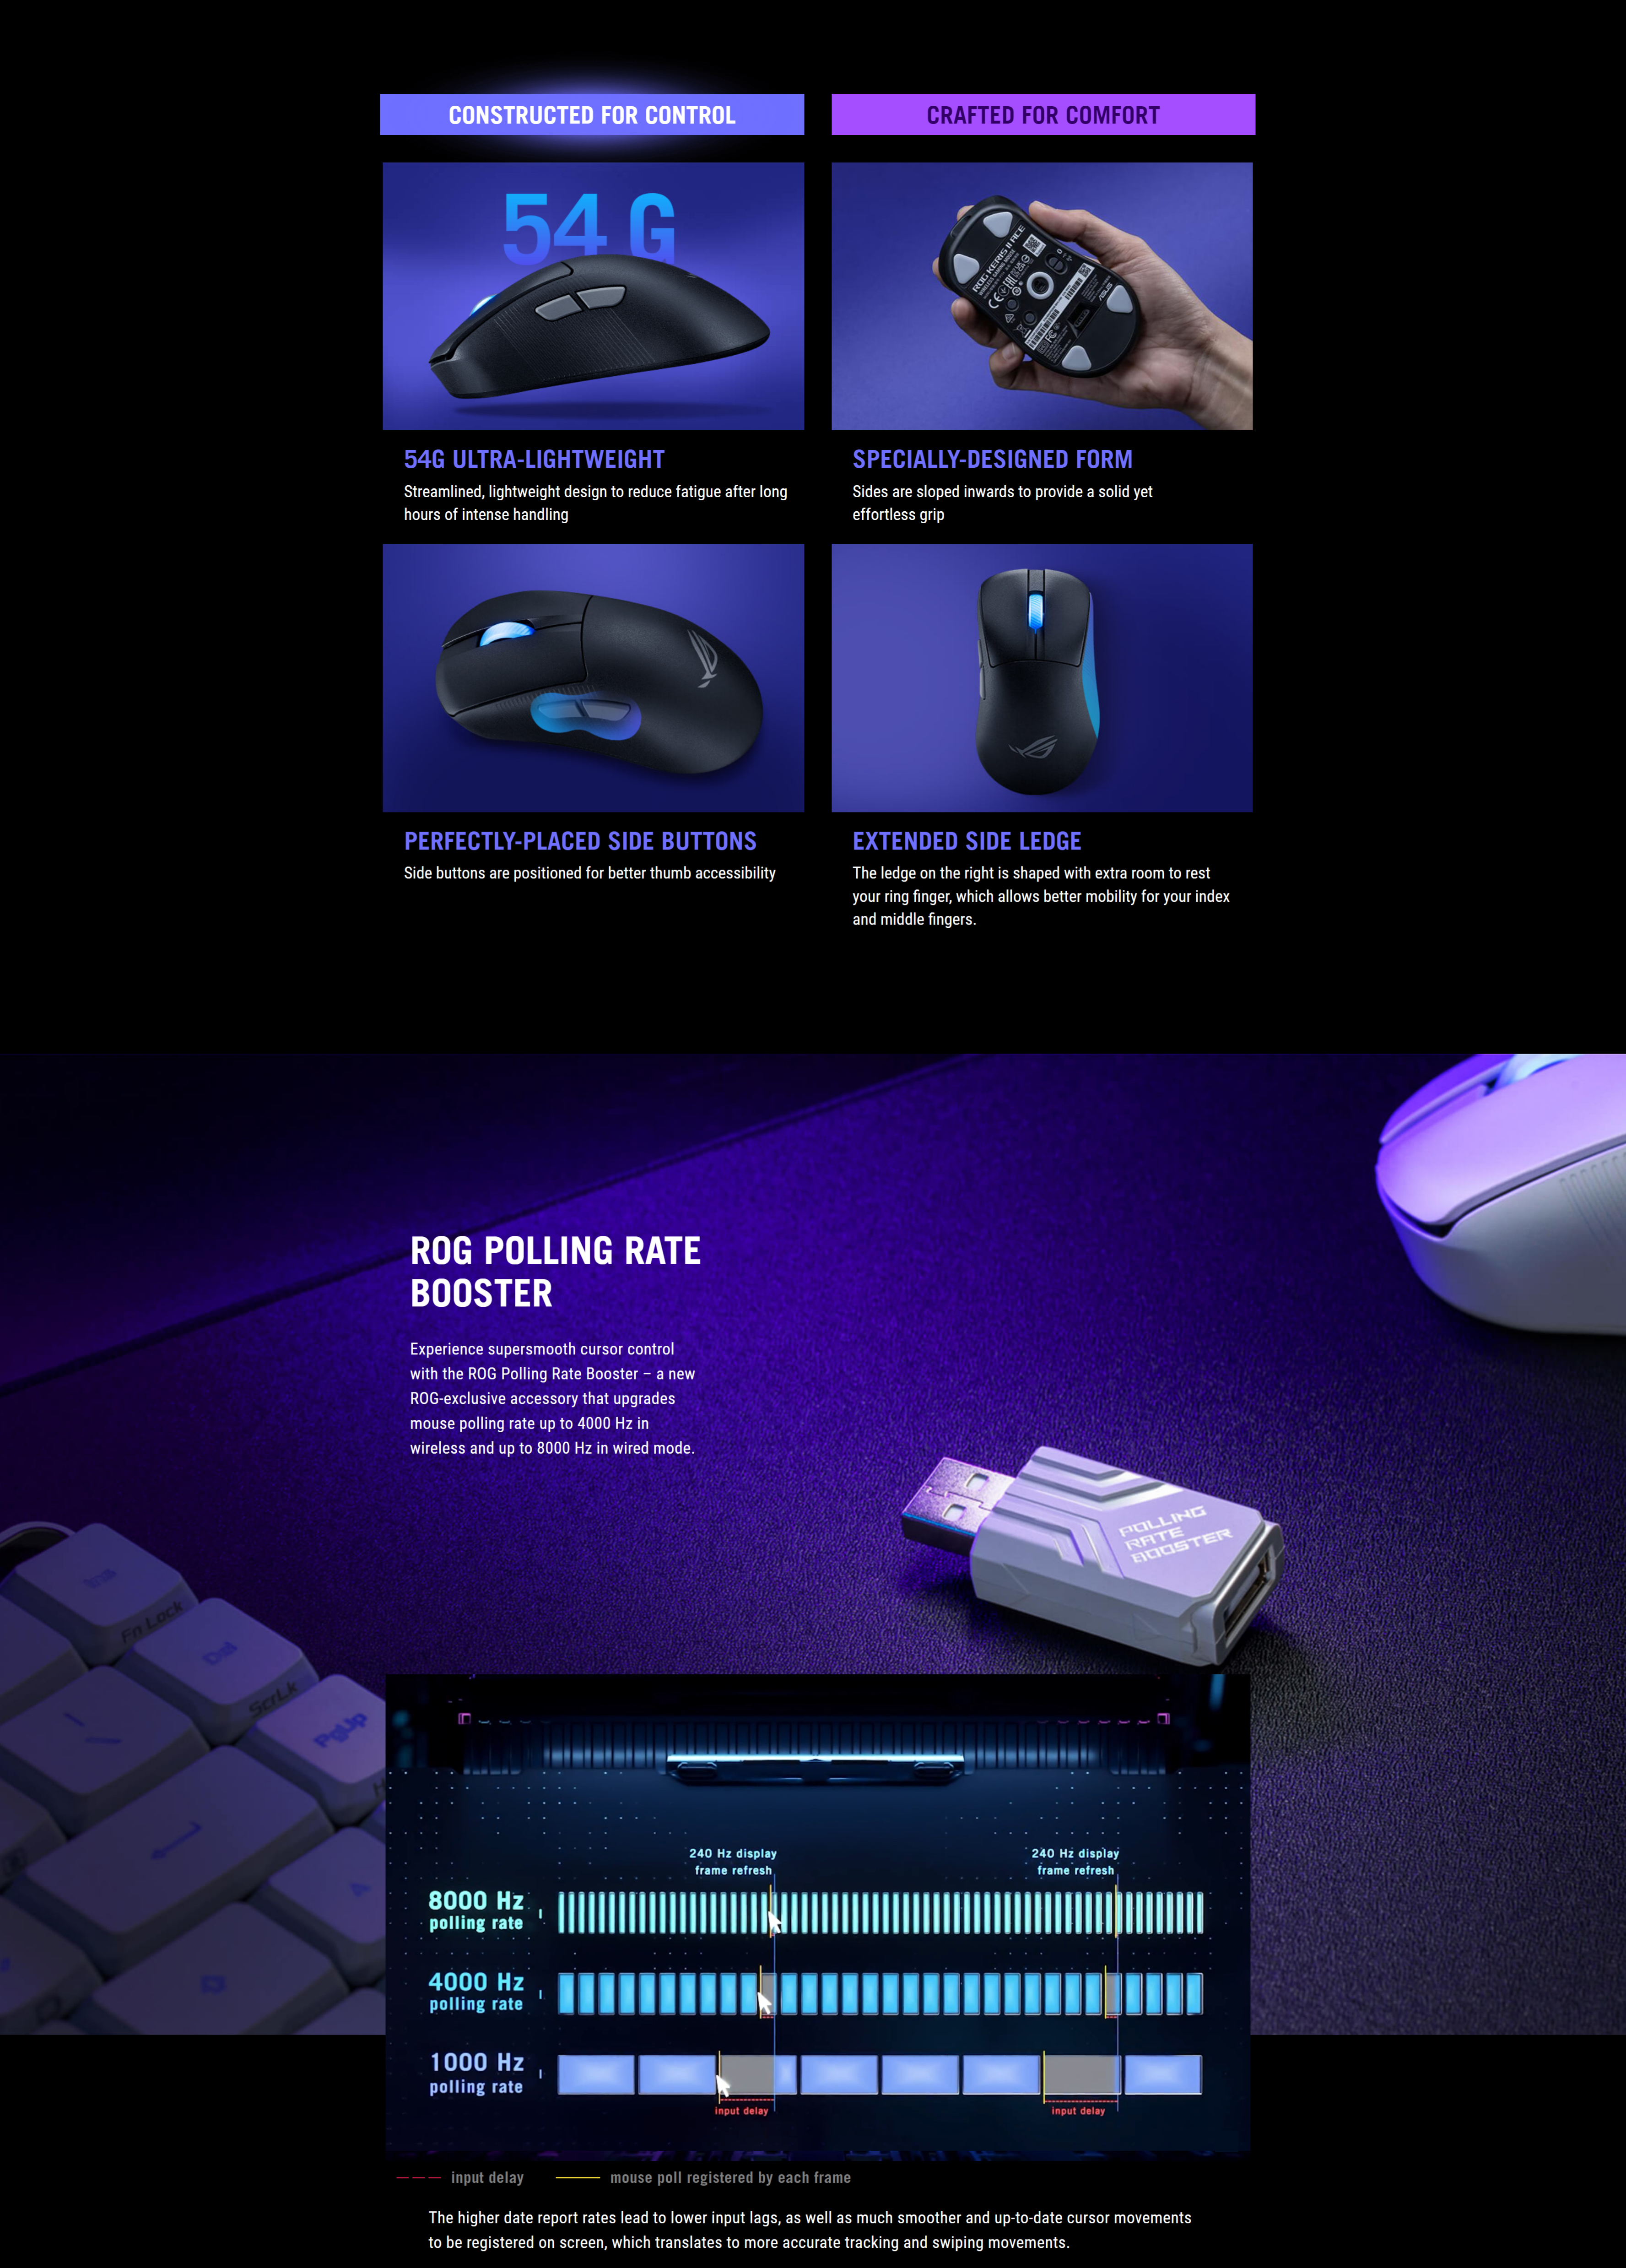 A large marketing image providing additional information about the product ASUS ROG Keris II Wireless Ace - Black - Additional alt info not provided